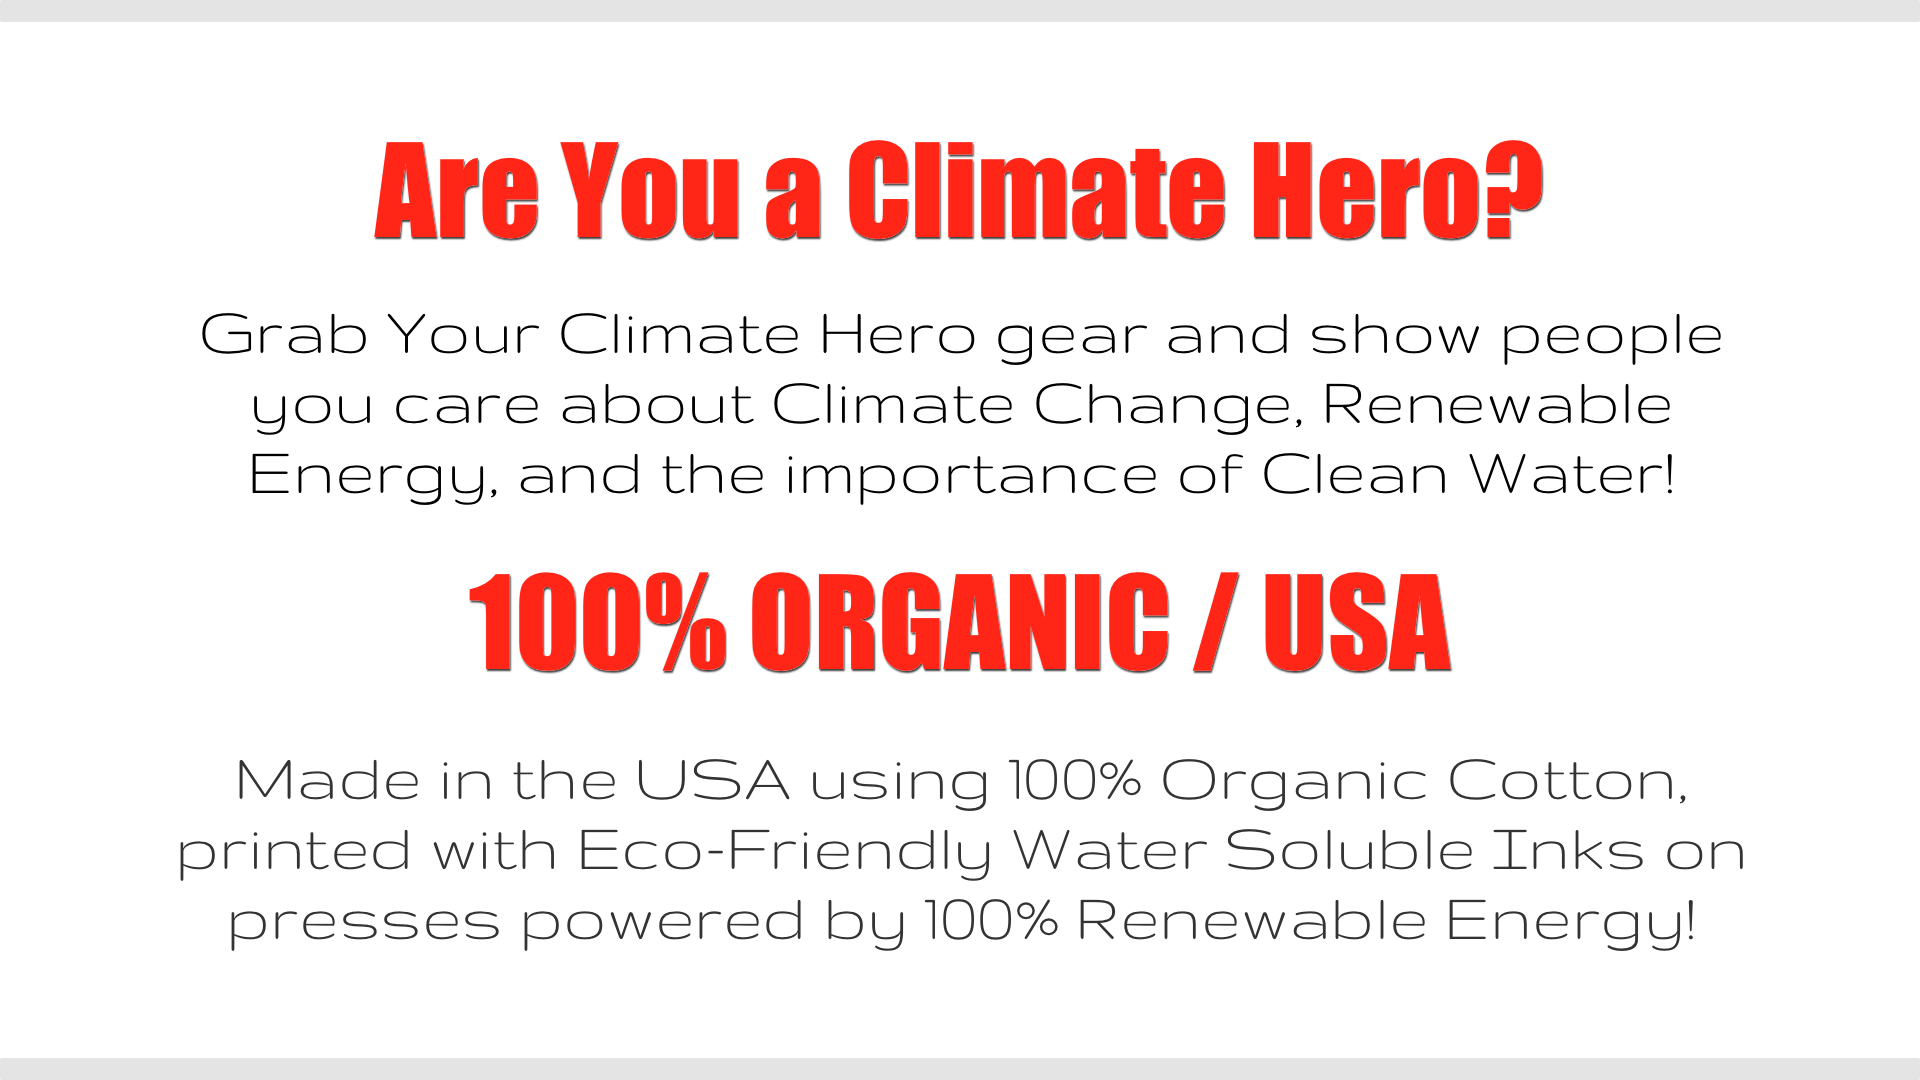 Are You a Climate Hero? Get Your Climate Hero gear and help us raise awareness about Climate Change, Clean Water, and Renewable Energy! http://climatehero.world - Climate Hero Brand - Get Your Climate Hero gear & show people you care about Climate Change, Renewable Energy, and the importance of Clean Water! Made in the USA using 100% Organic Cotton, printed with Eco-Friendly Water Soluble Inks on presses powered by 100% Renewable Energy! - Climate Hero Store #ClimateHero